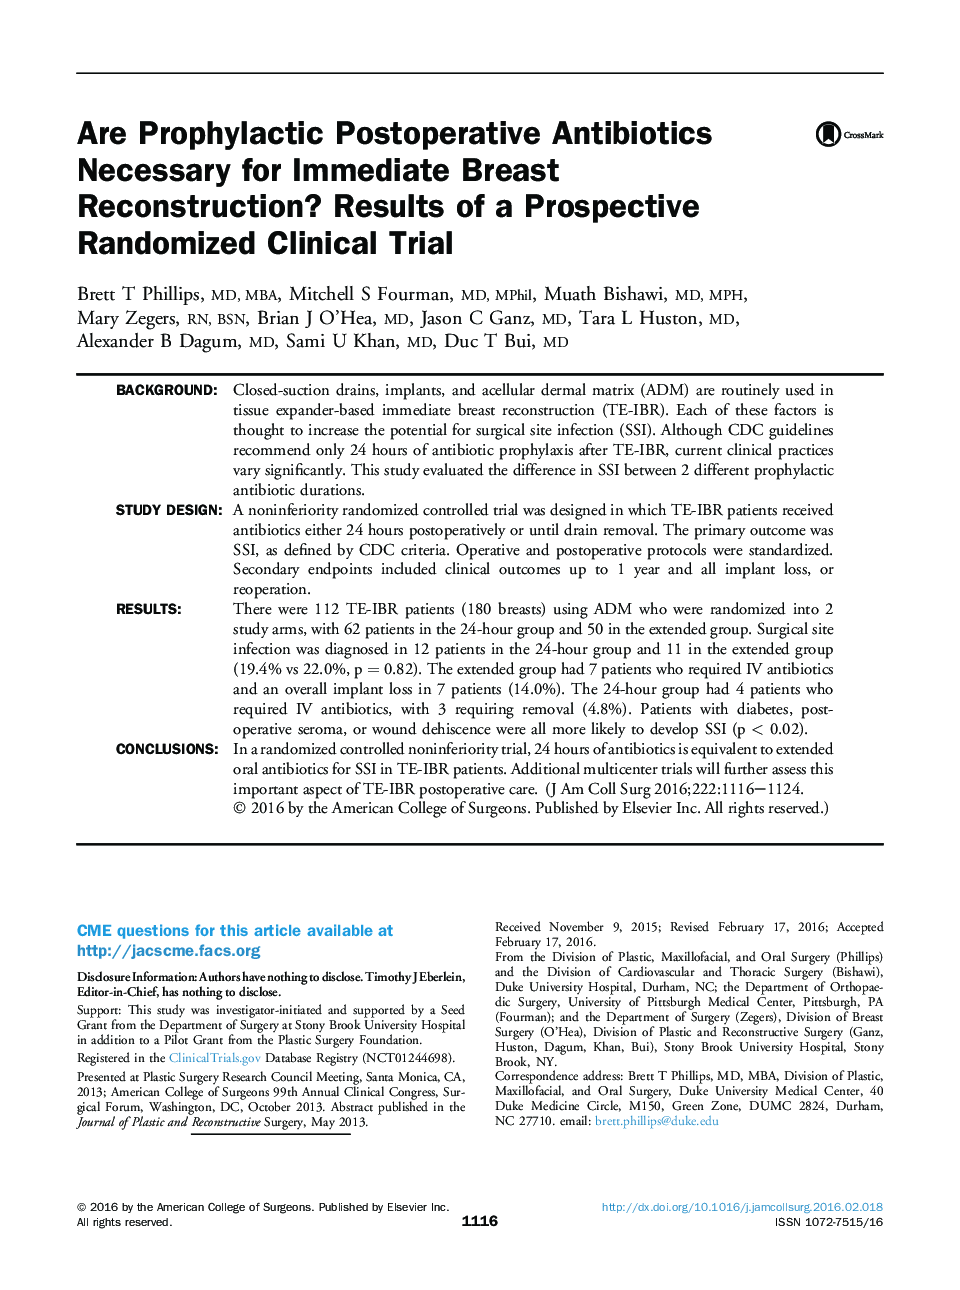 Are Prophylactic Postoperative Antibiotics Necessary for Immediate Breast Reconstruction? Results of a Prospective Randomized Clinical Trial 